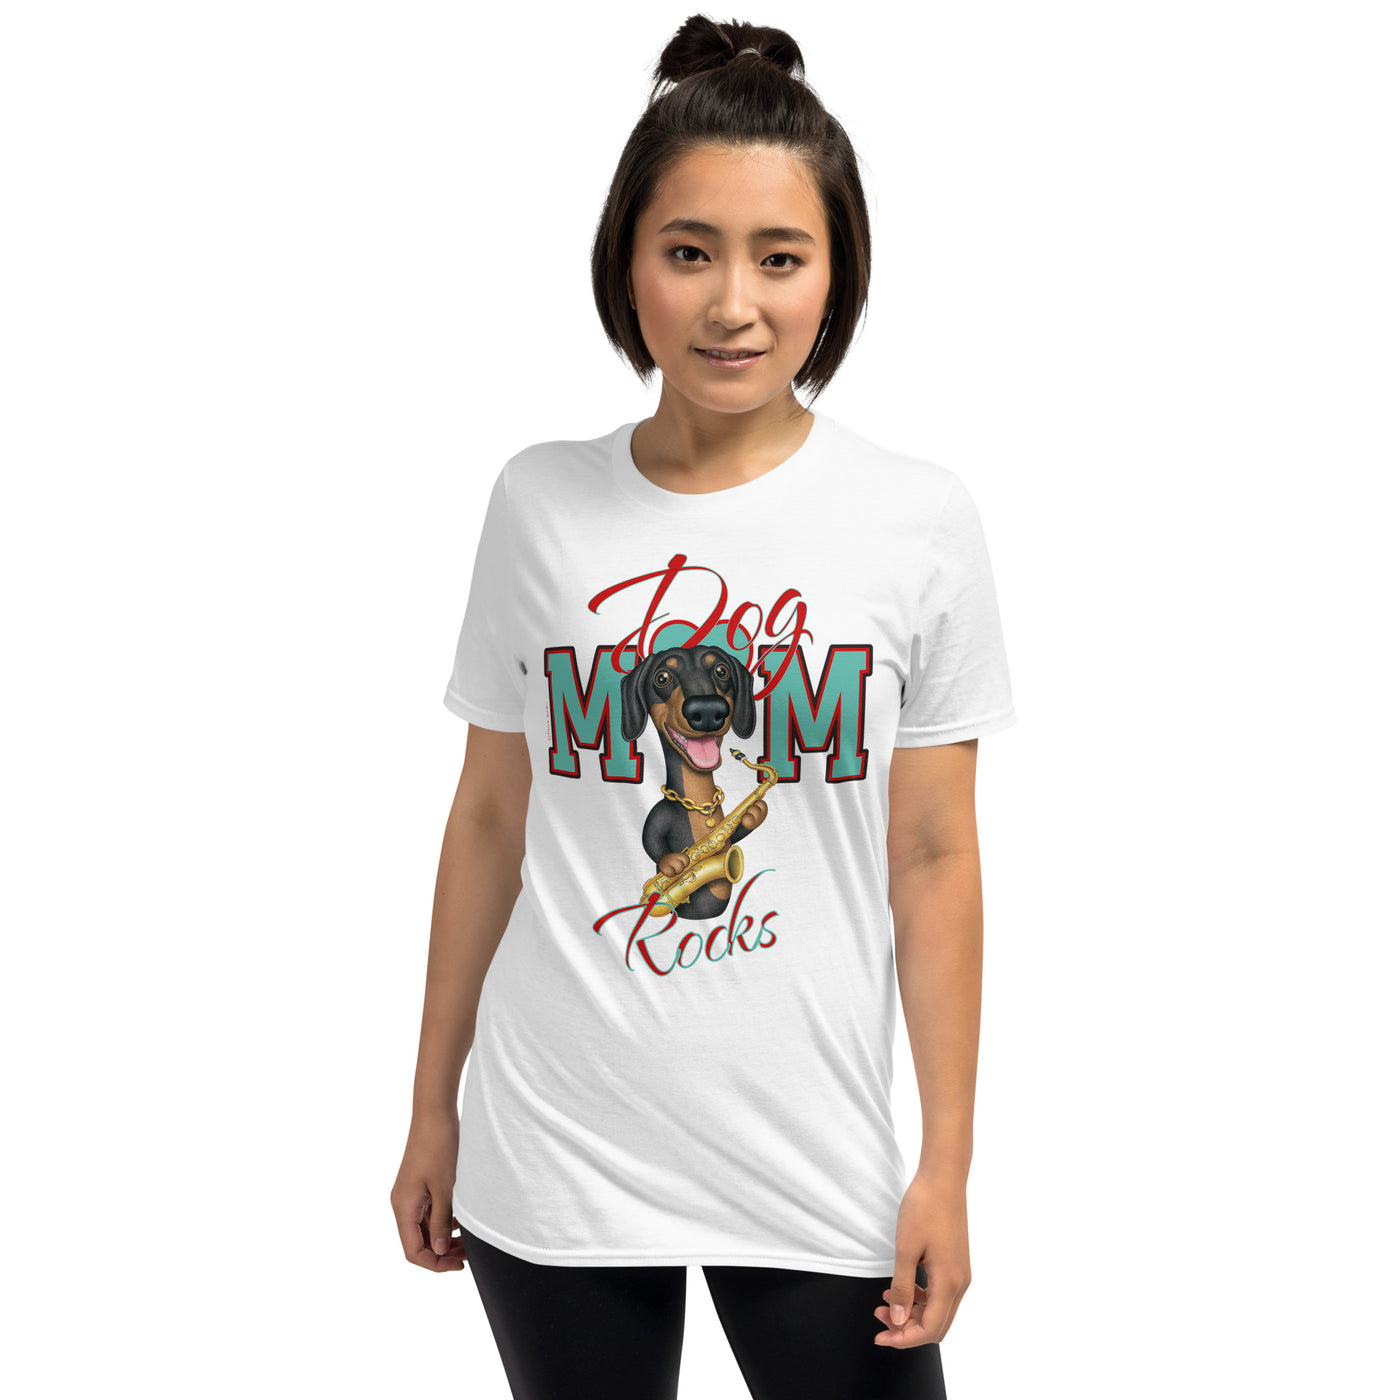 Funny and cute Doxie with a Dog Mom Rocks Unisex T-Shirt tee